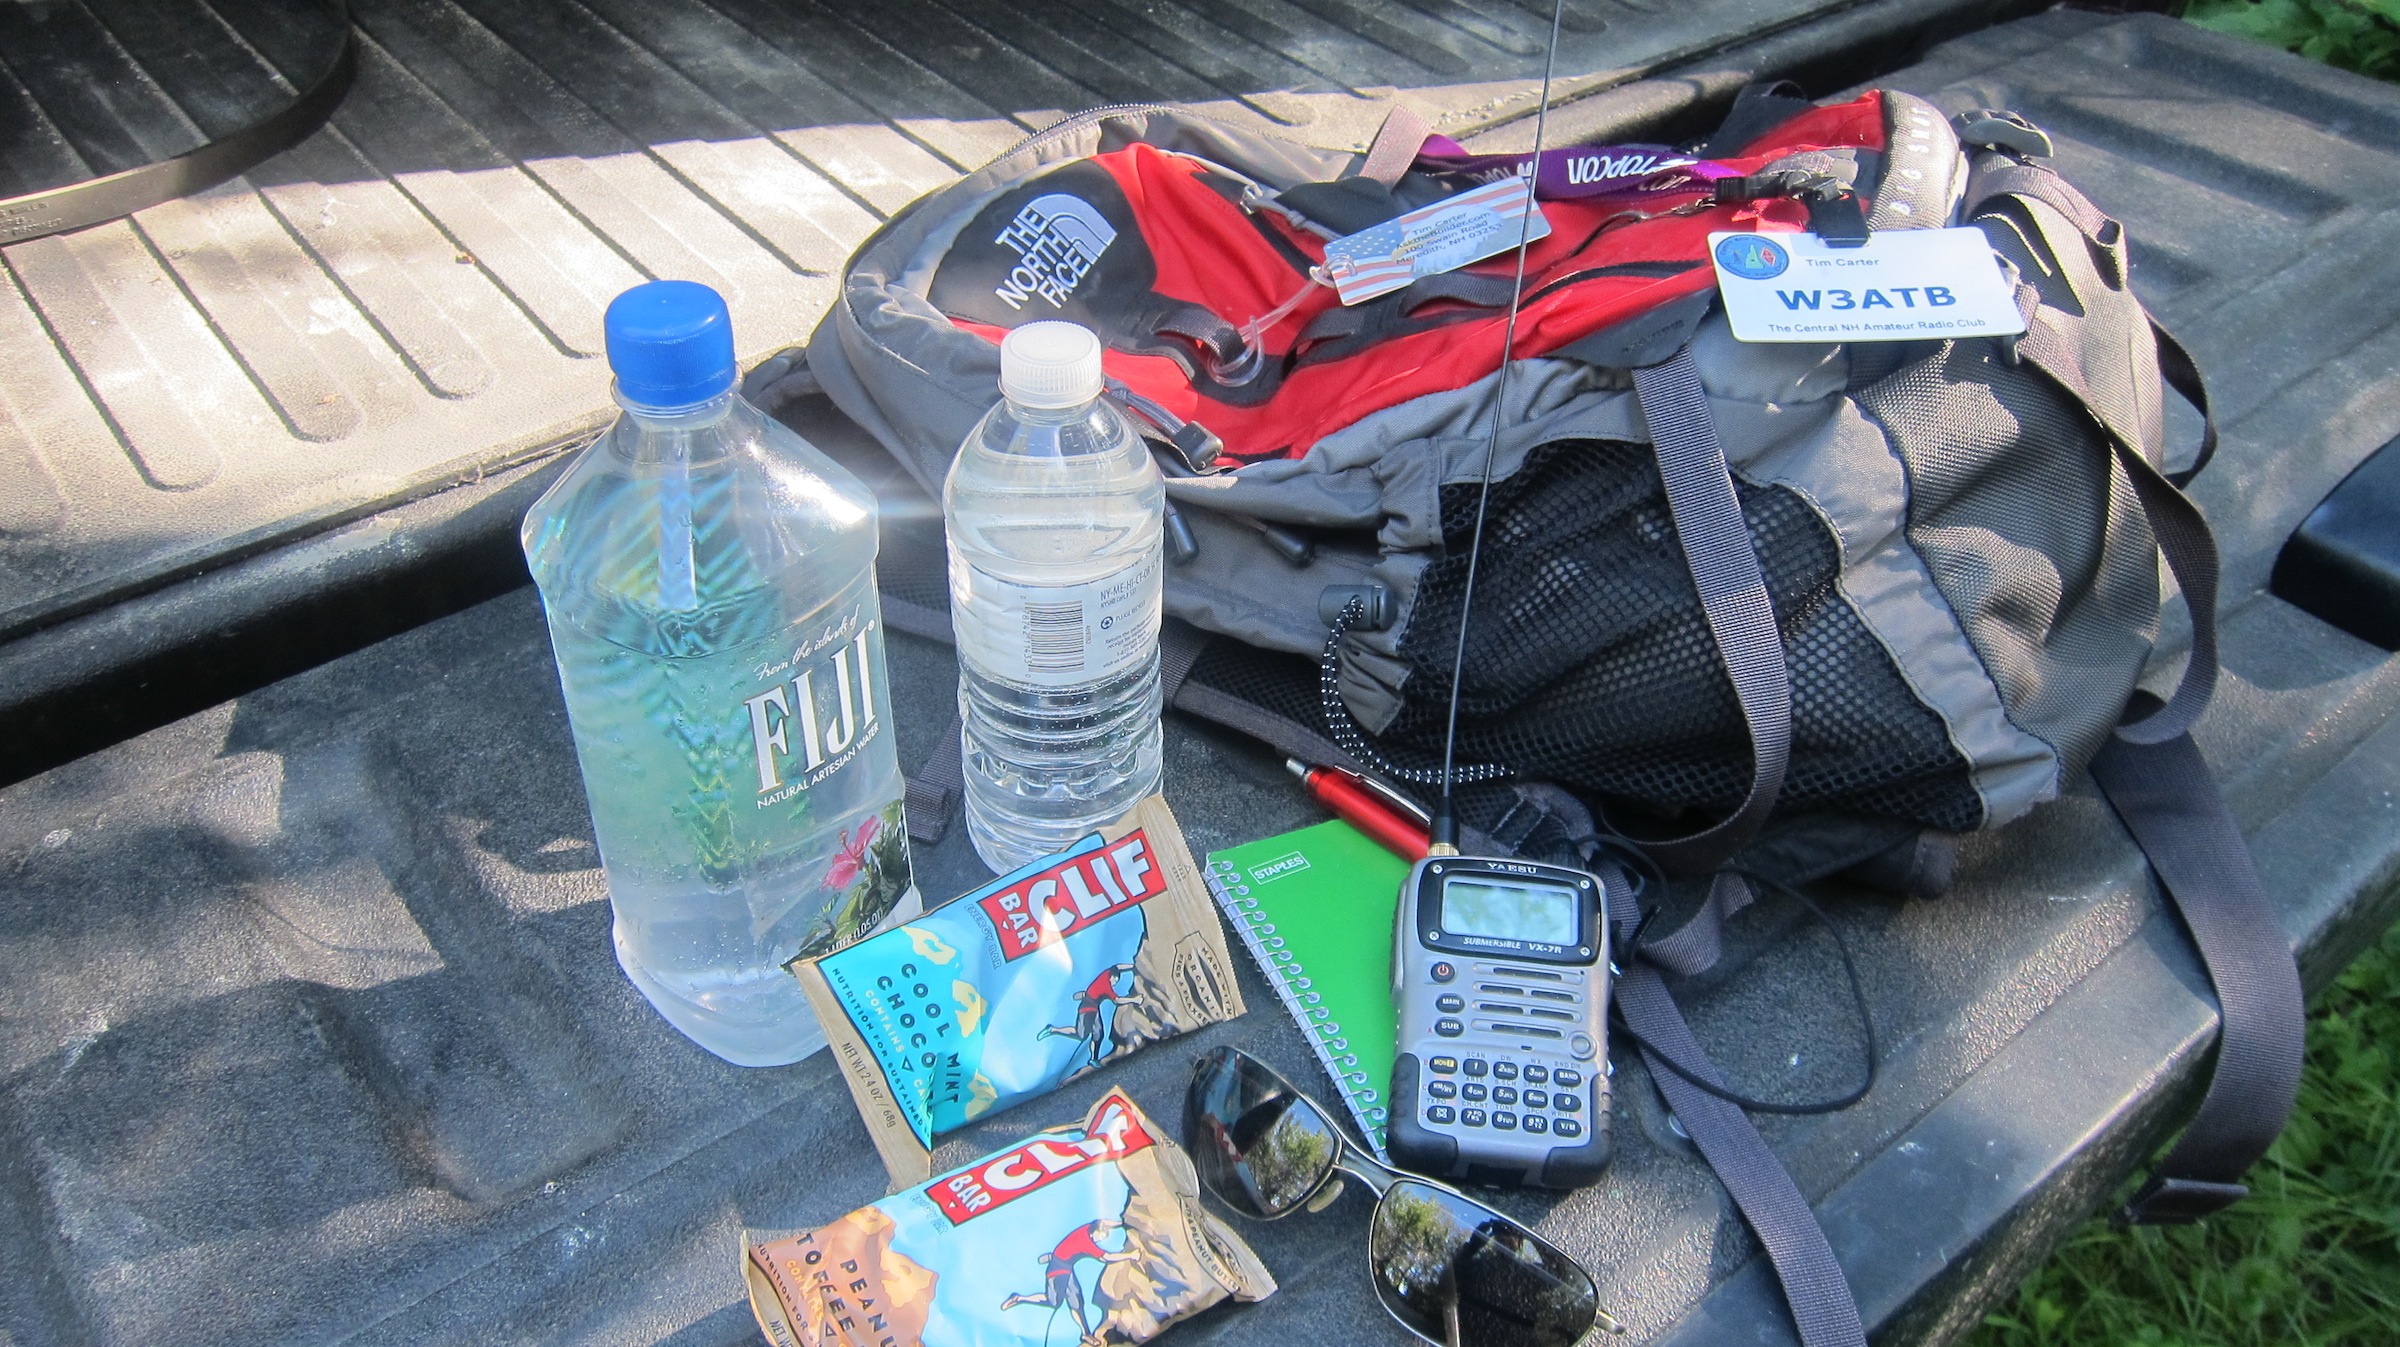 Here's the gear I carried to the summit. Much needed water, nutrition, radio, notebook and pen and sunglasses. More clothes were in the backpack.